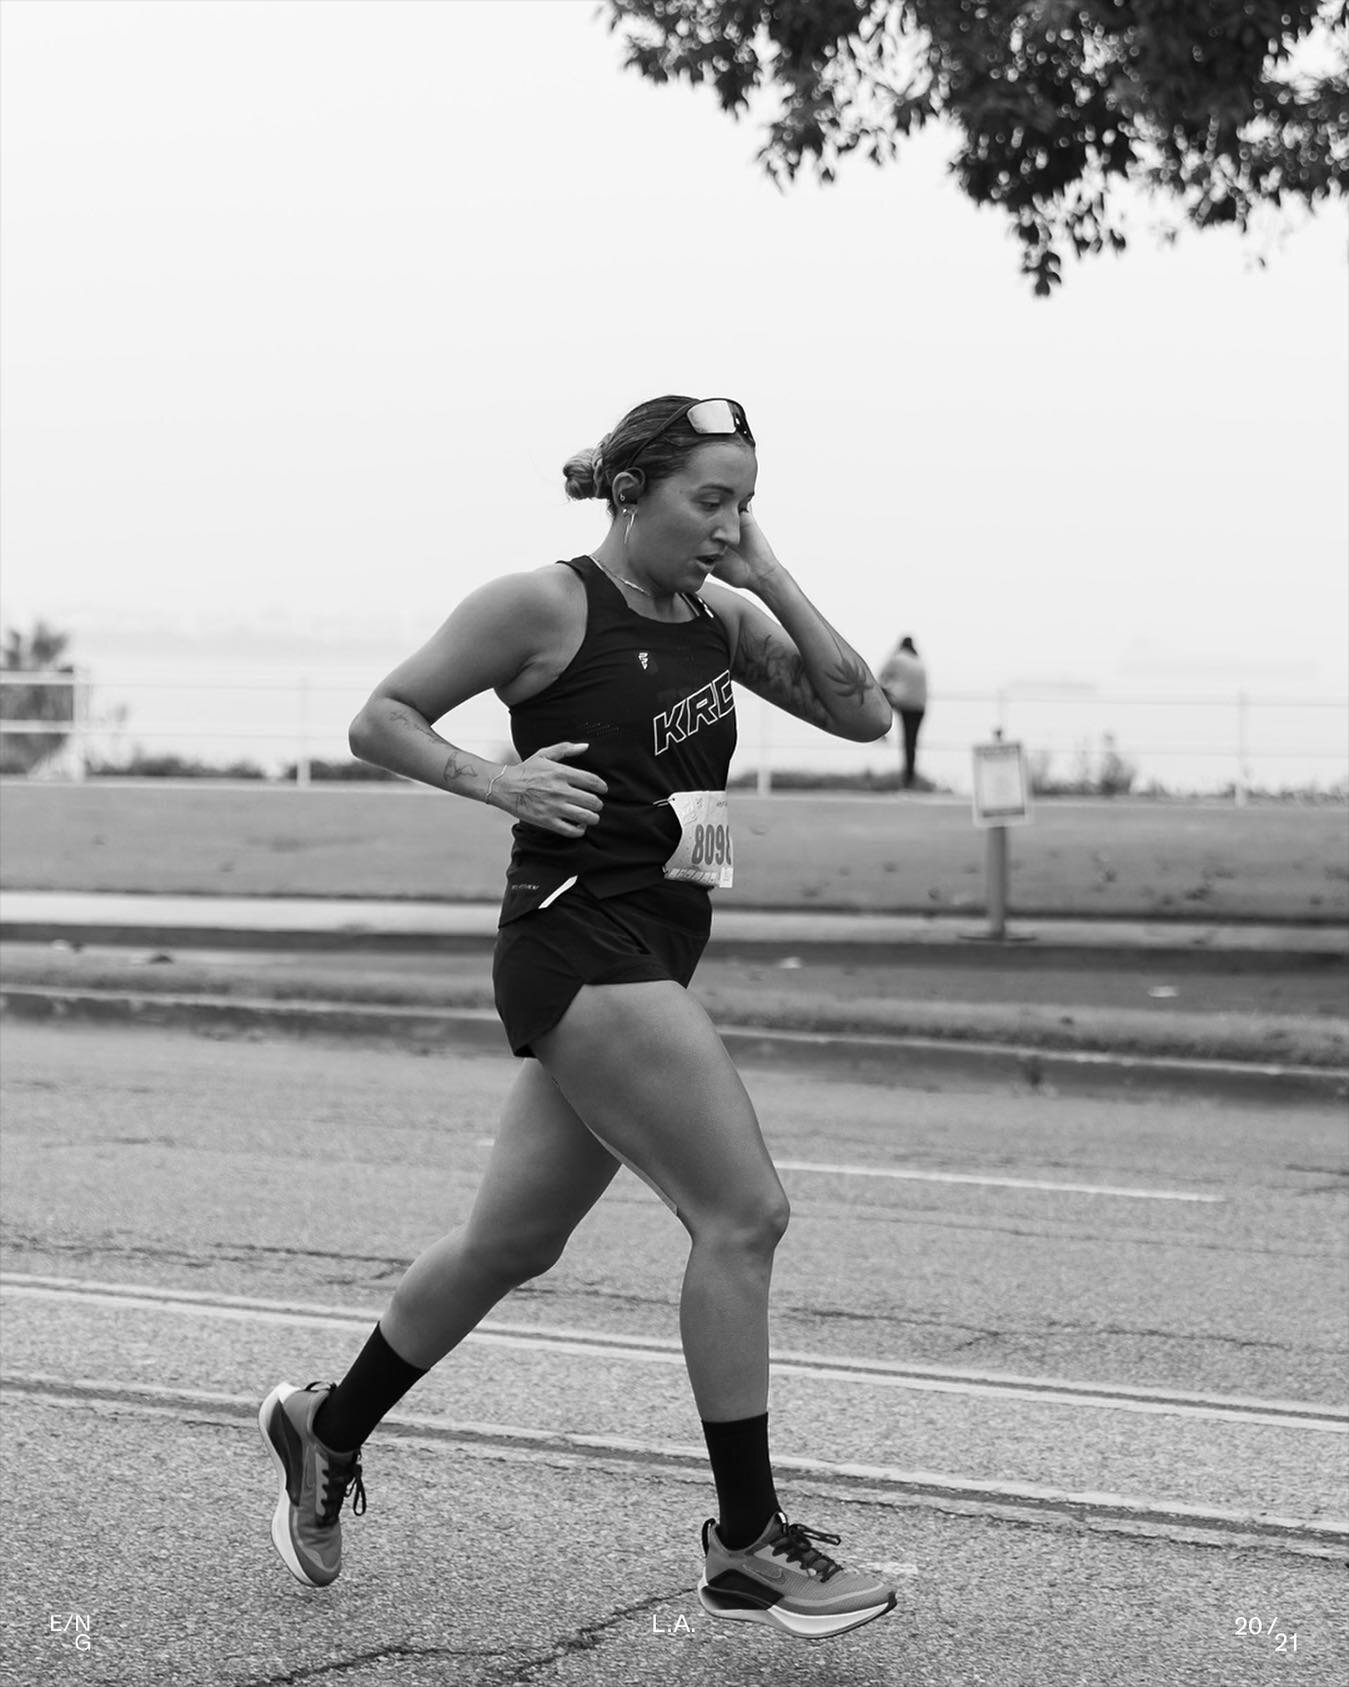 Congratulations to @dre.a on completing the Long Beach half marathon. Drea who also represents @koreatownrunclub joined us 
last year wanting to get stronger from an ACL injury (2019) that prevented her from racing. When she joined, she was challenge